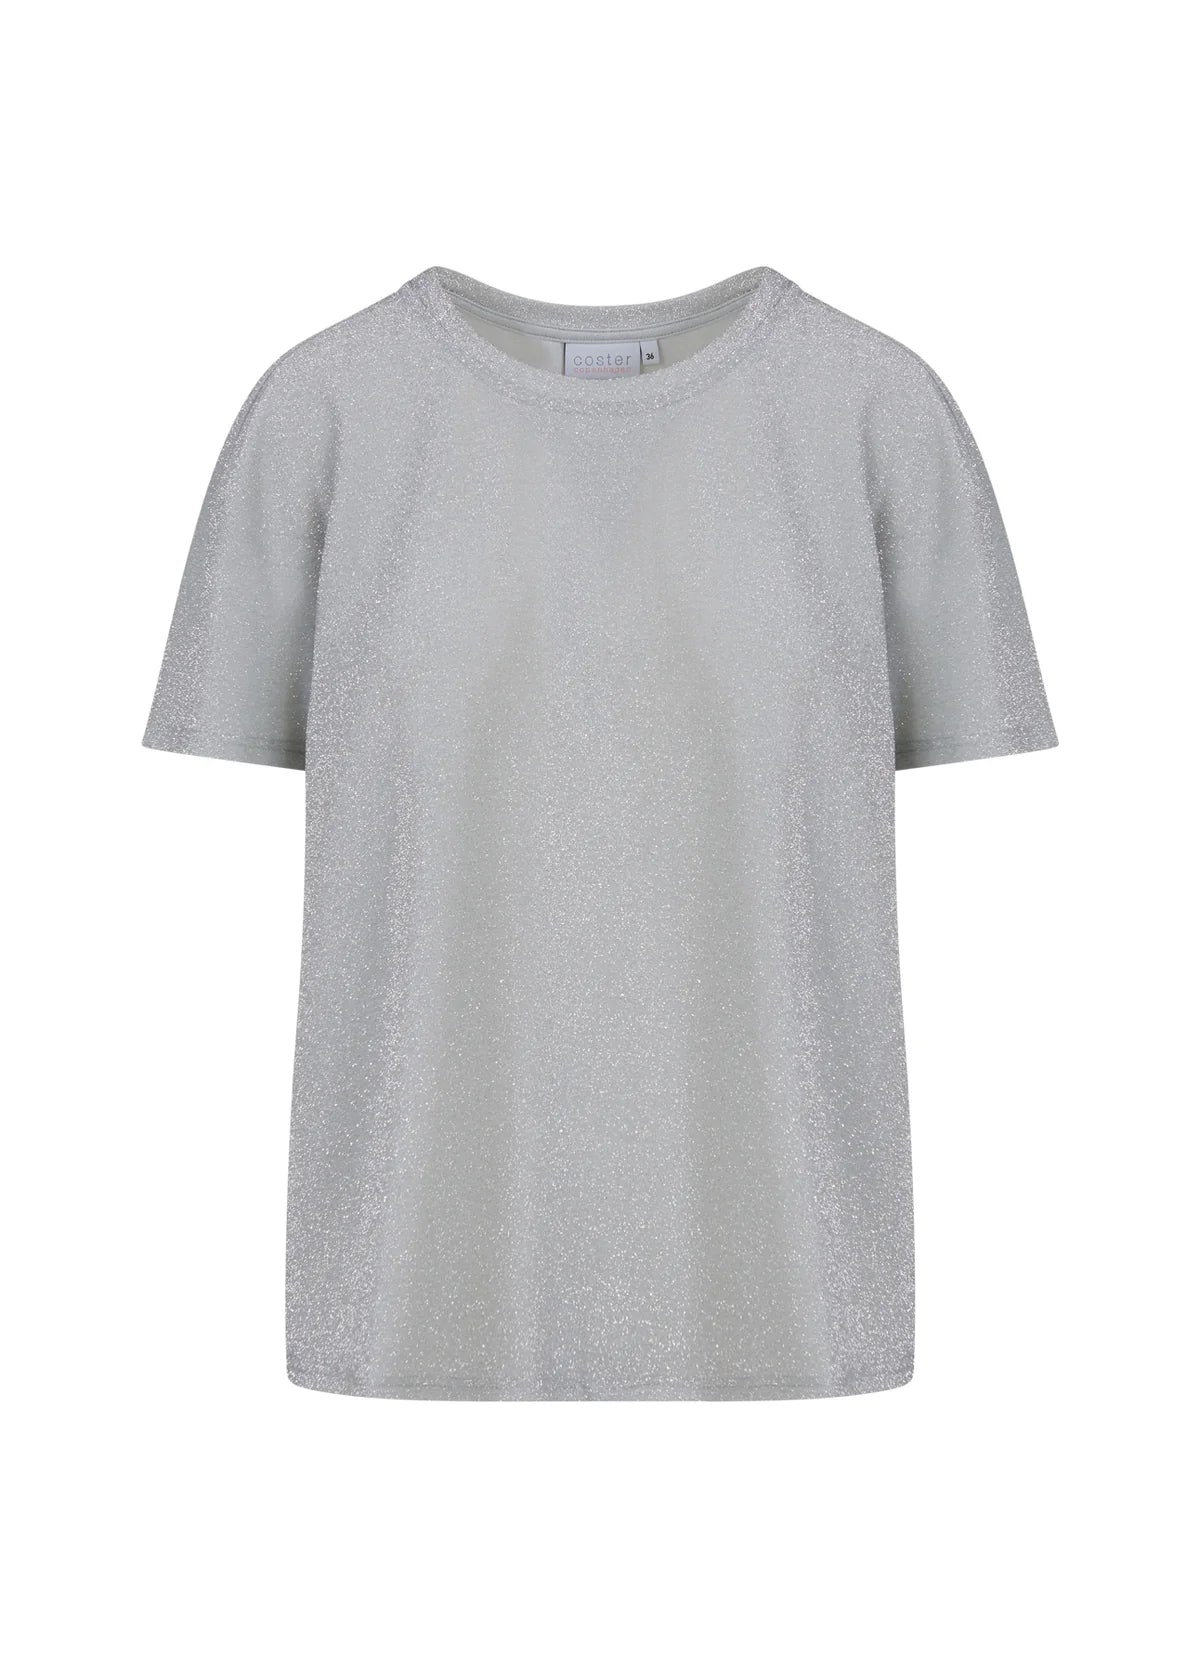 T-Shirt with Shimmer Silver